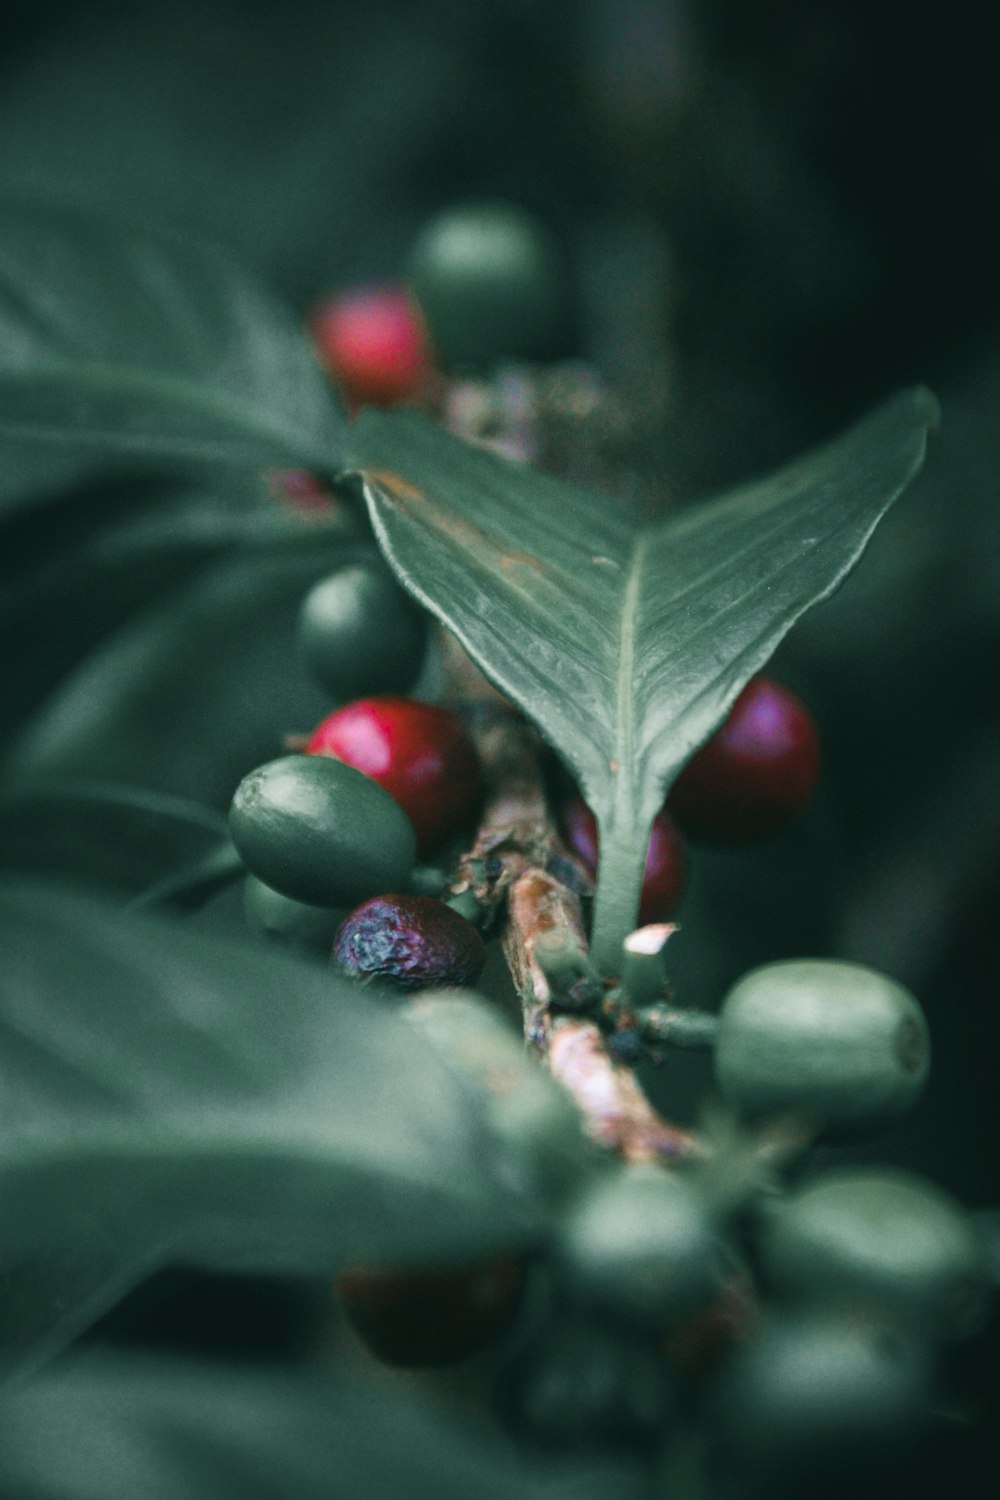 a close up of berries and leaves on a tree